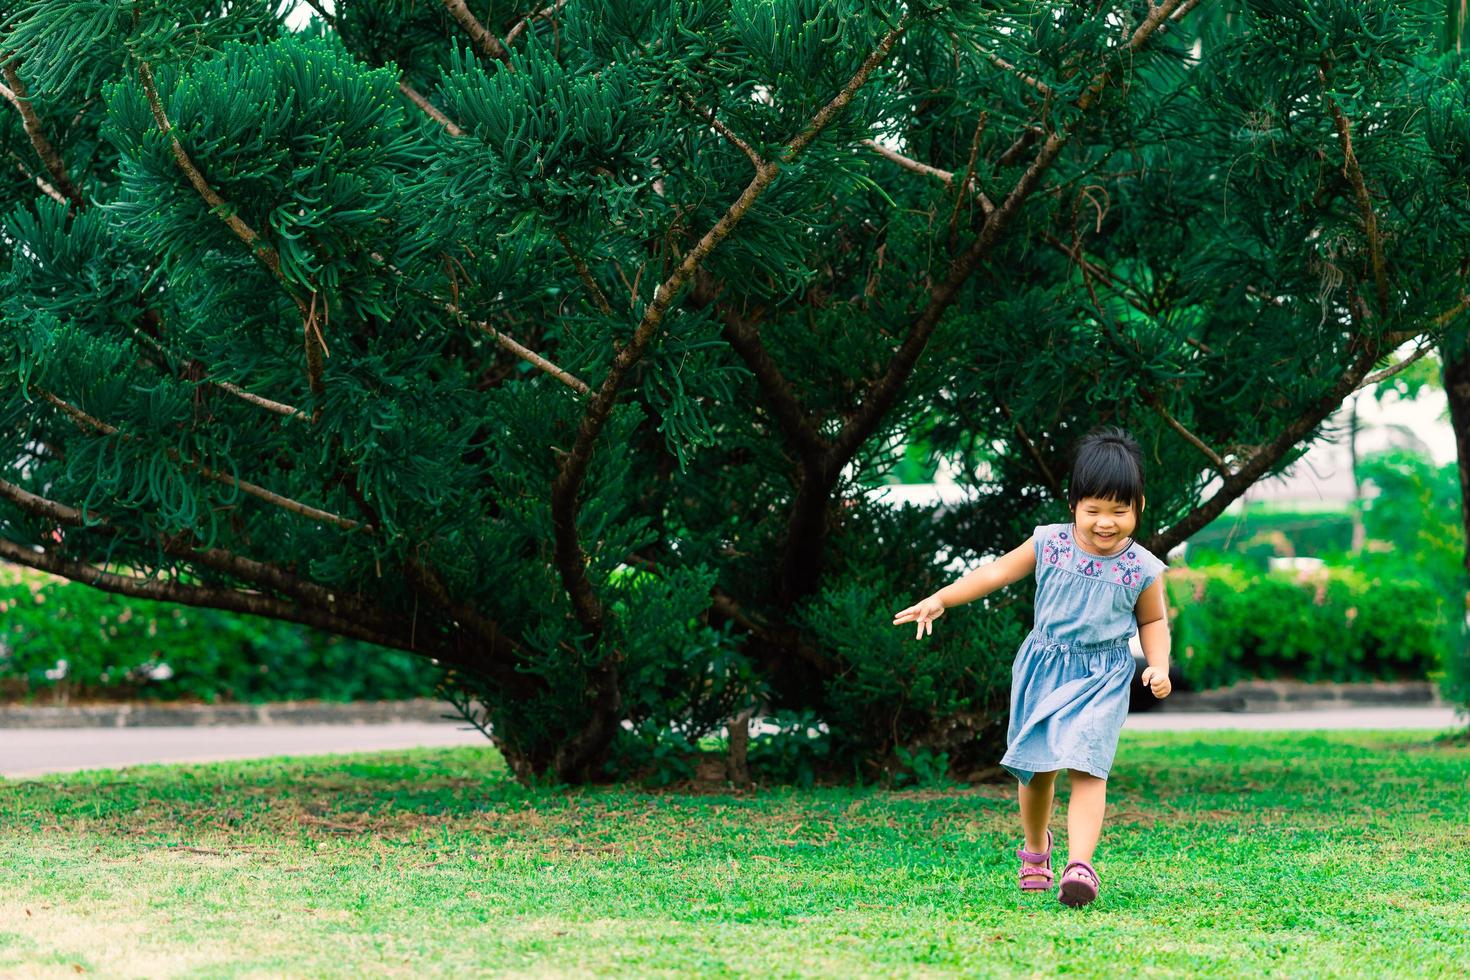 A happy little girl in a dress running in the park photo